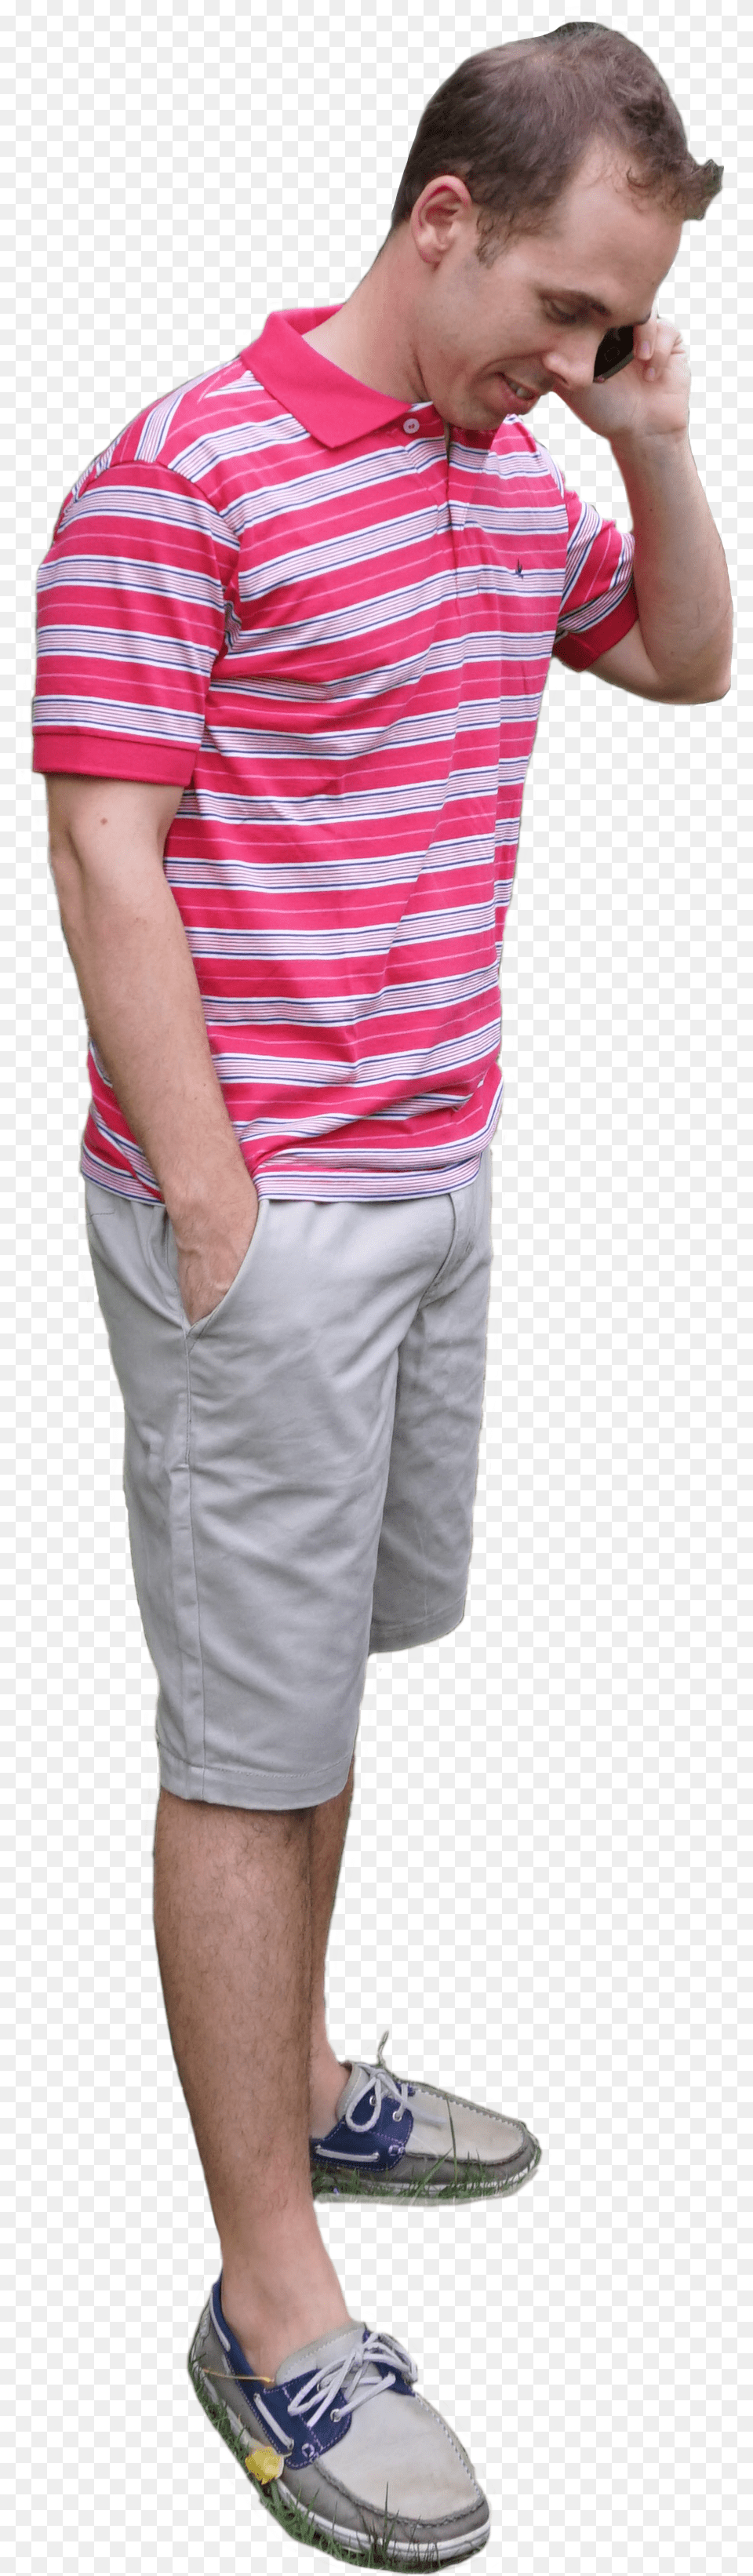 Casual People Polo Shirt, Adult, Sneaker, Shorts, Shoe Free Png Download